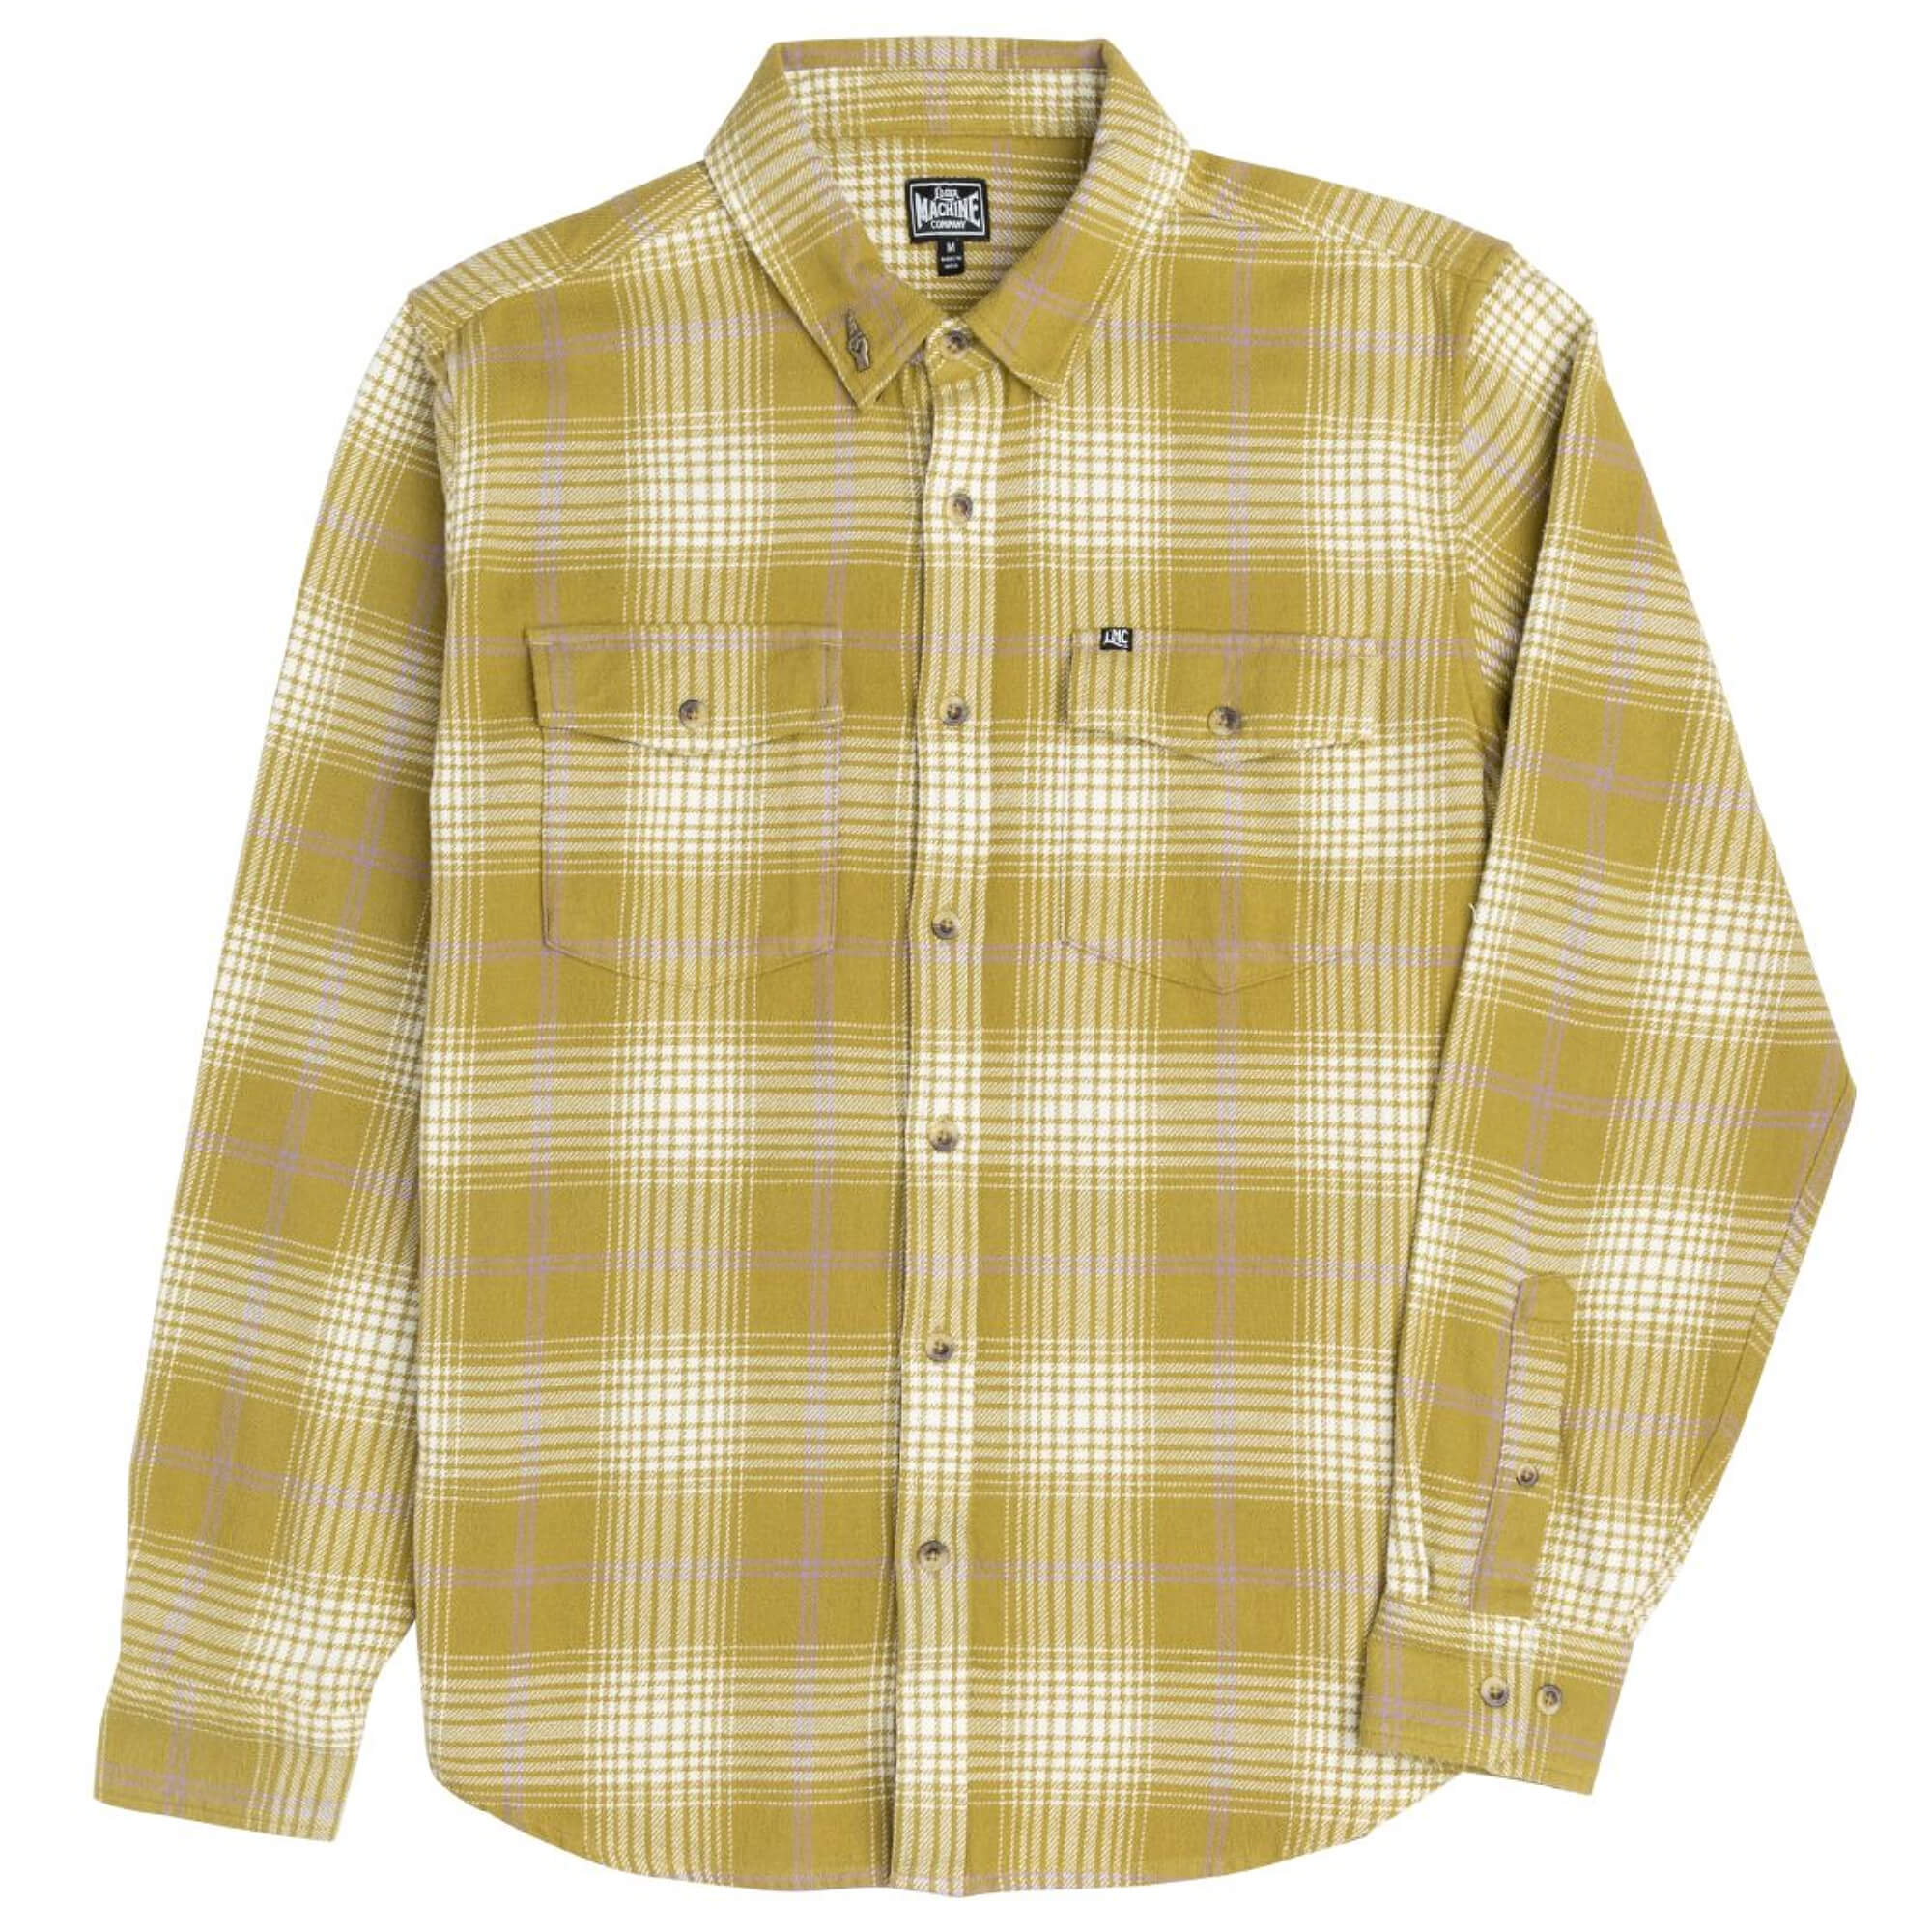 Loser Machine Hovley Woven Shirt Willow White